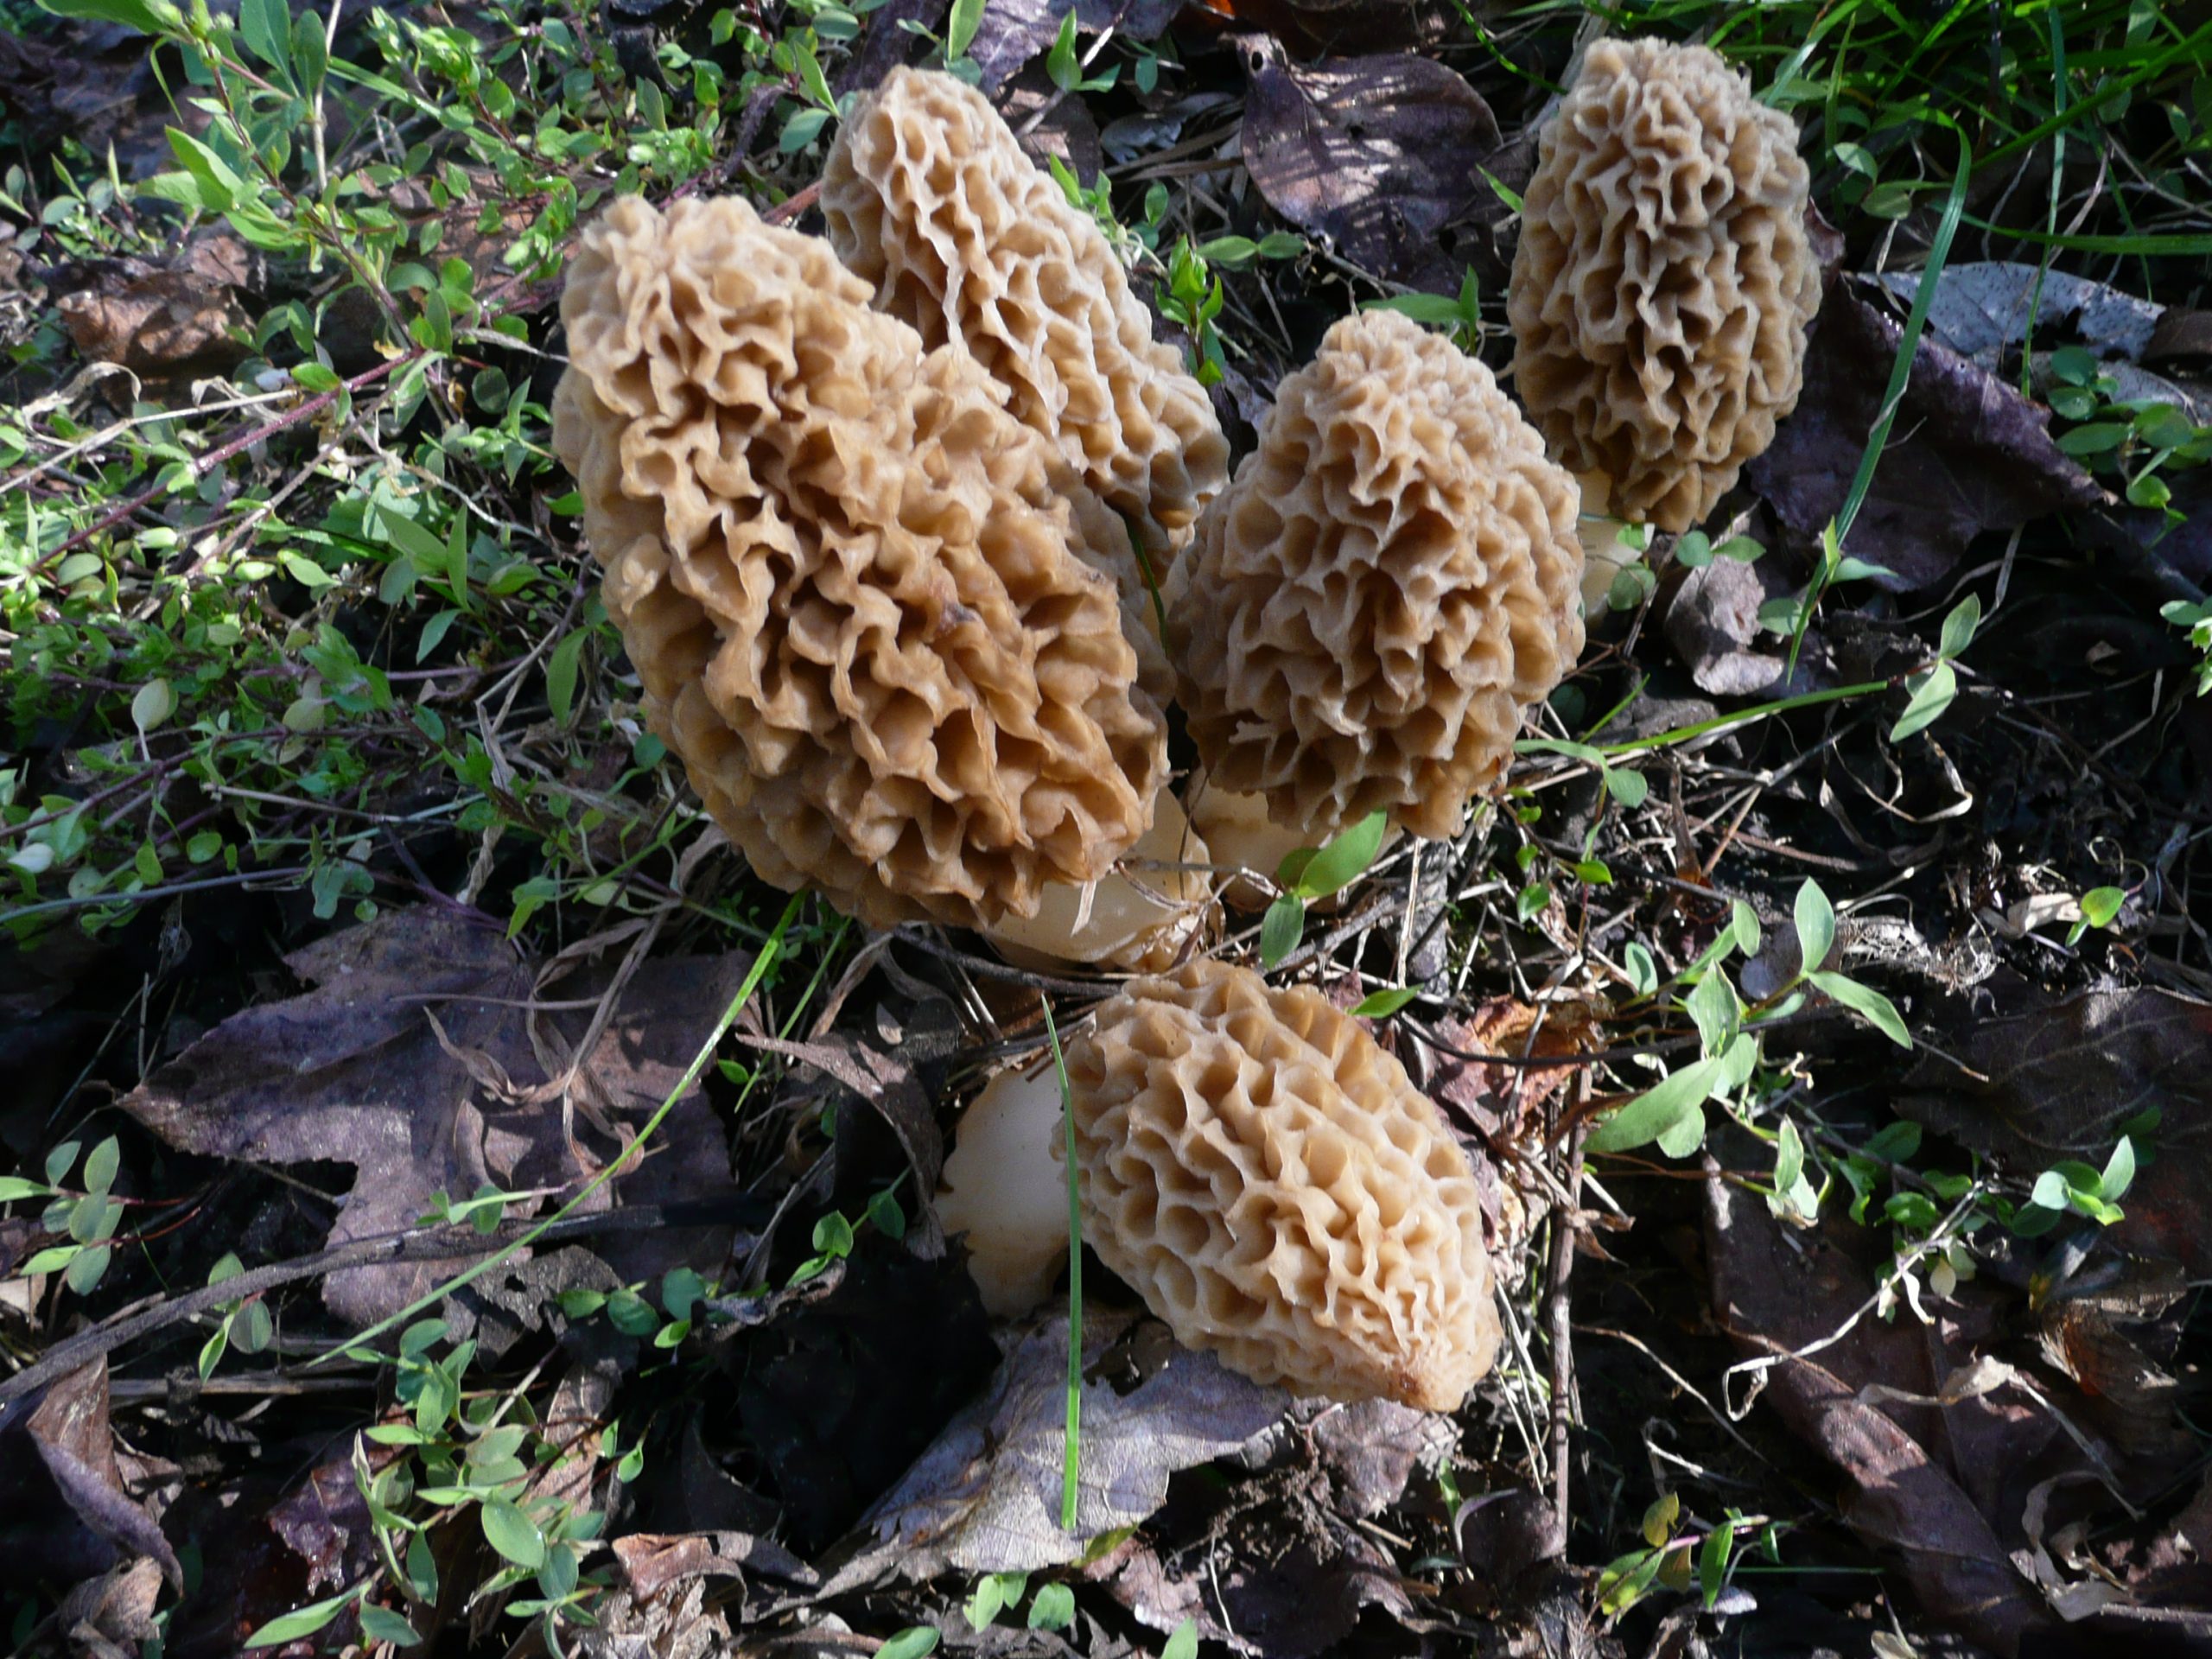 Spring in the turkey woods means an ever-unfolding feast for the eyes. This involves spotting wild bounty available for immediate harvest or heralding fine vittles in months to come. Pride of place in this regard must go to morel mushrooms, and they are far more widespread in the Piedmont and Upstate regions of South Carolina than is generally realized.  